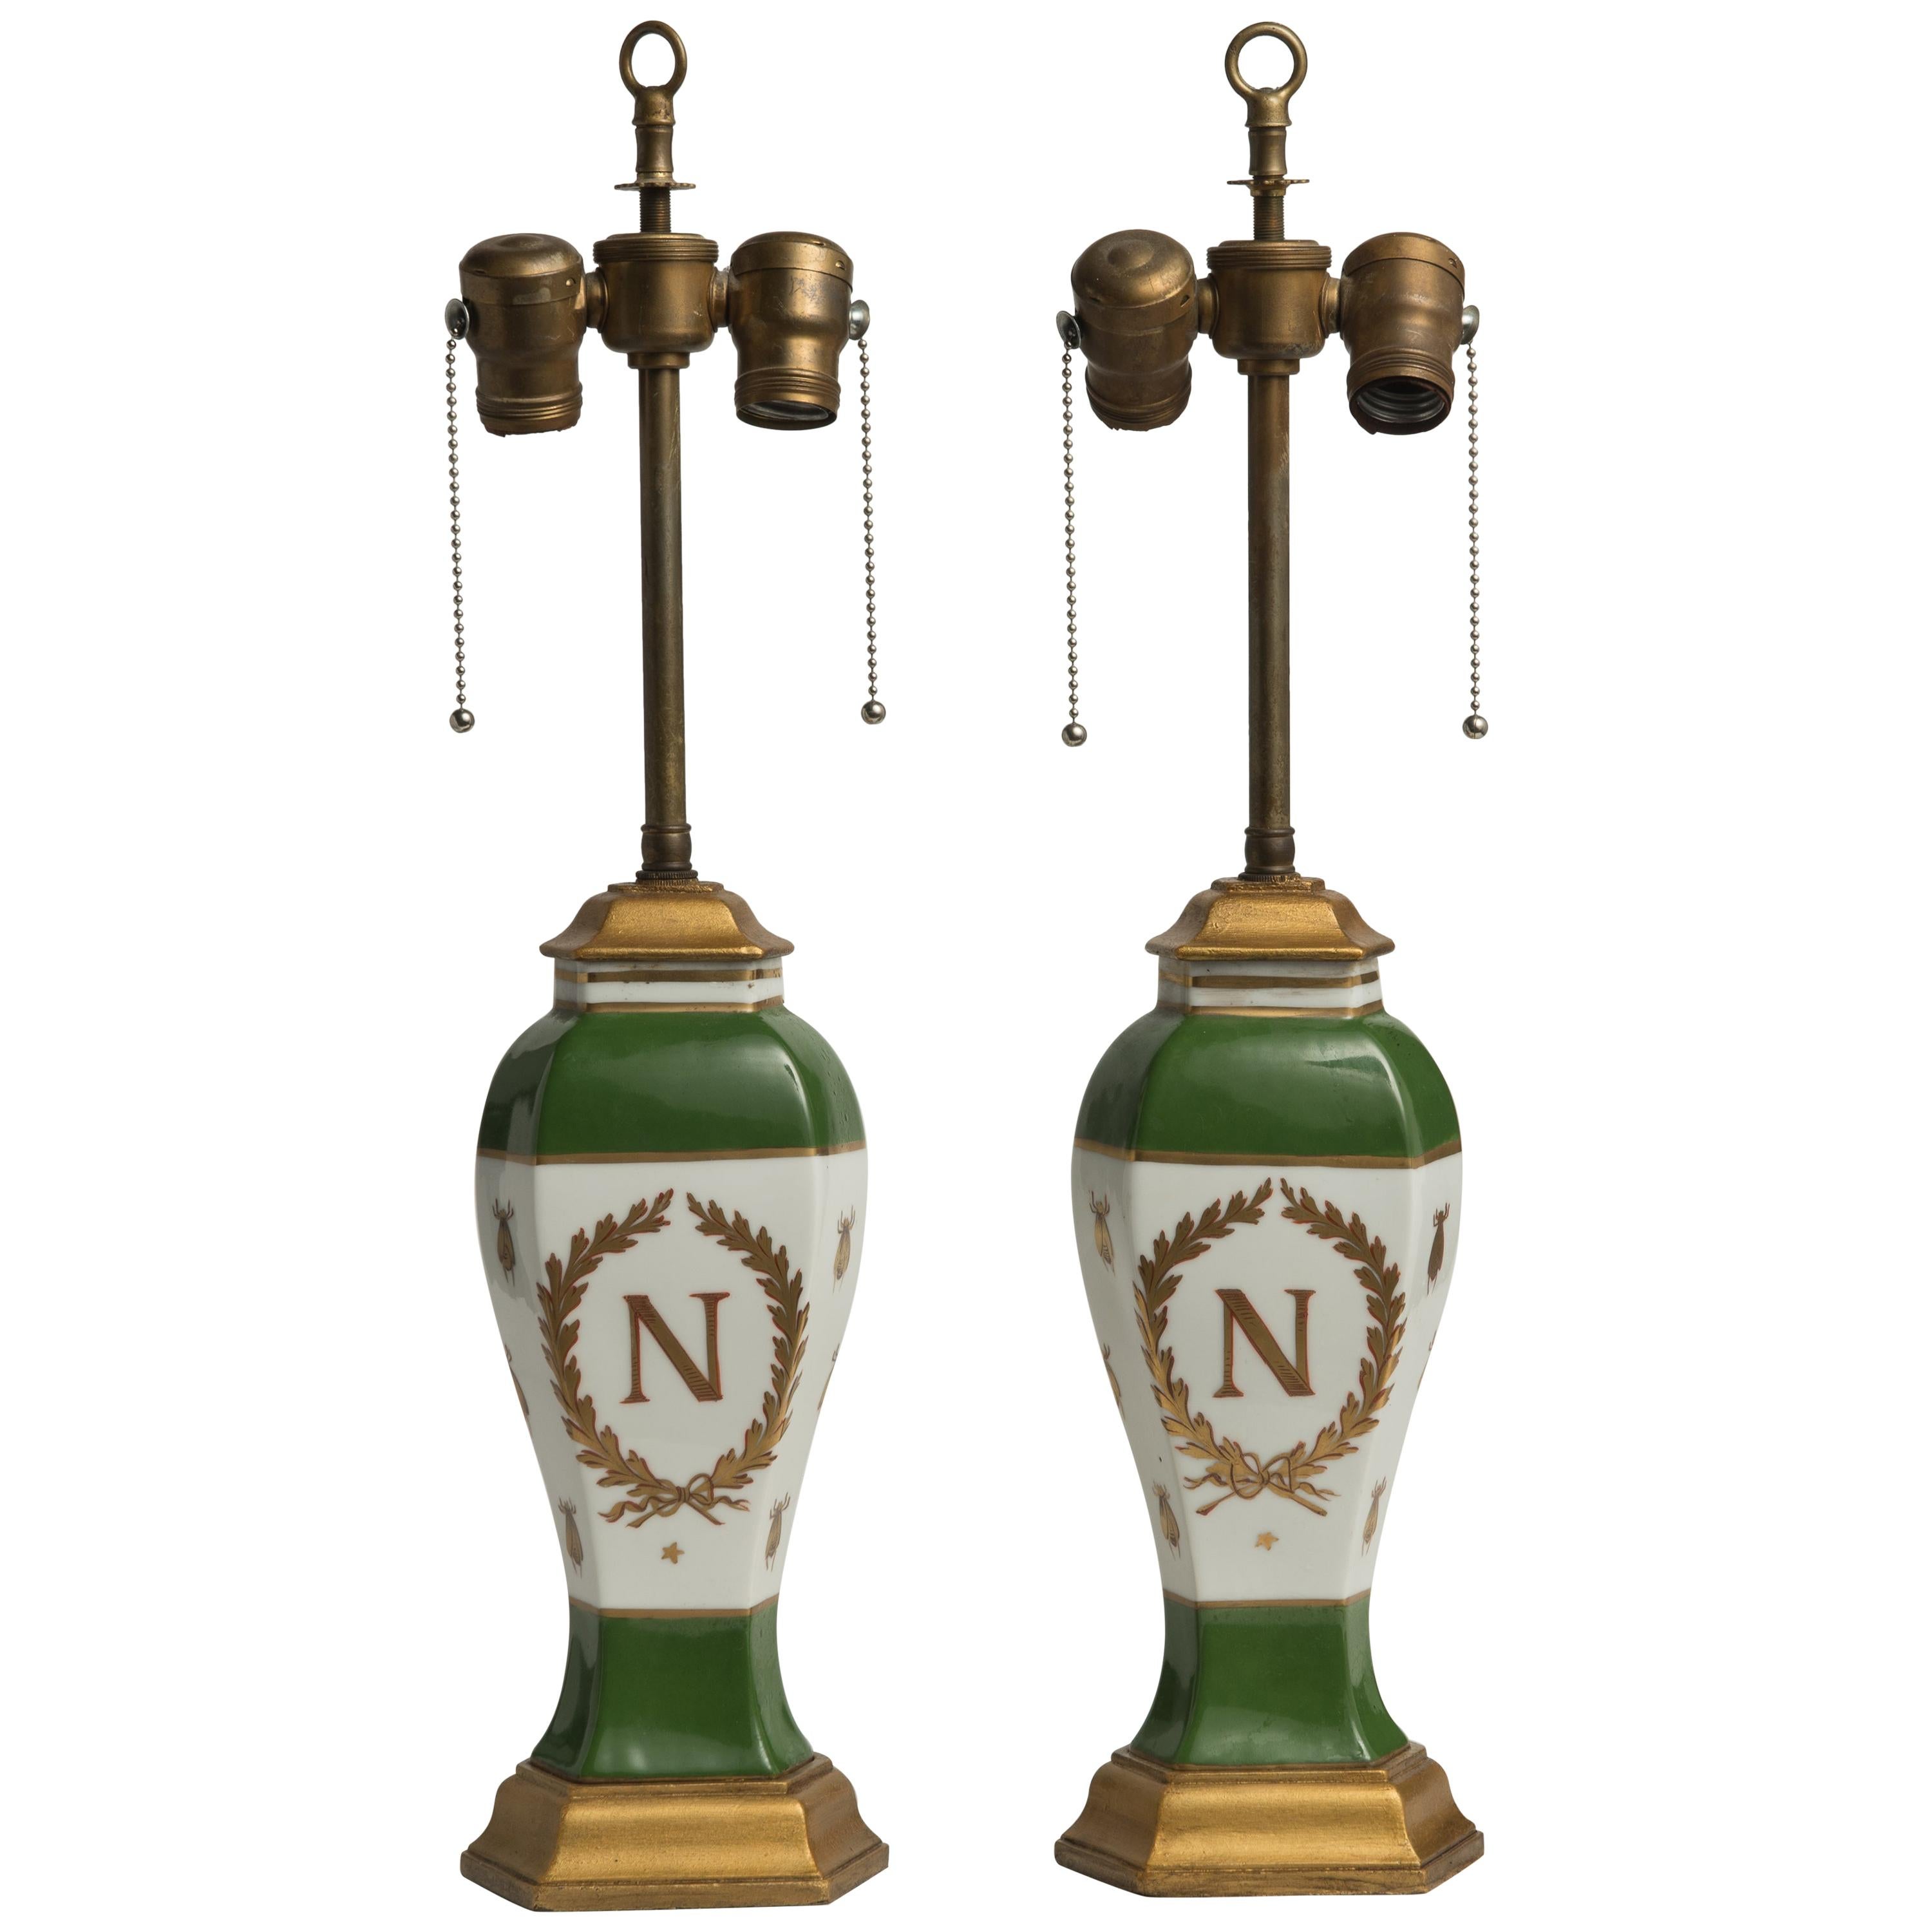 Late 19th Century French Napoleonic Lamps Style of Sèvres, a Pair